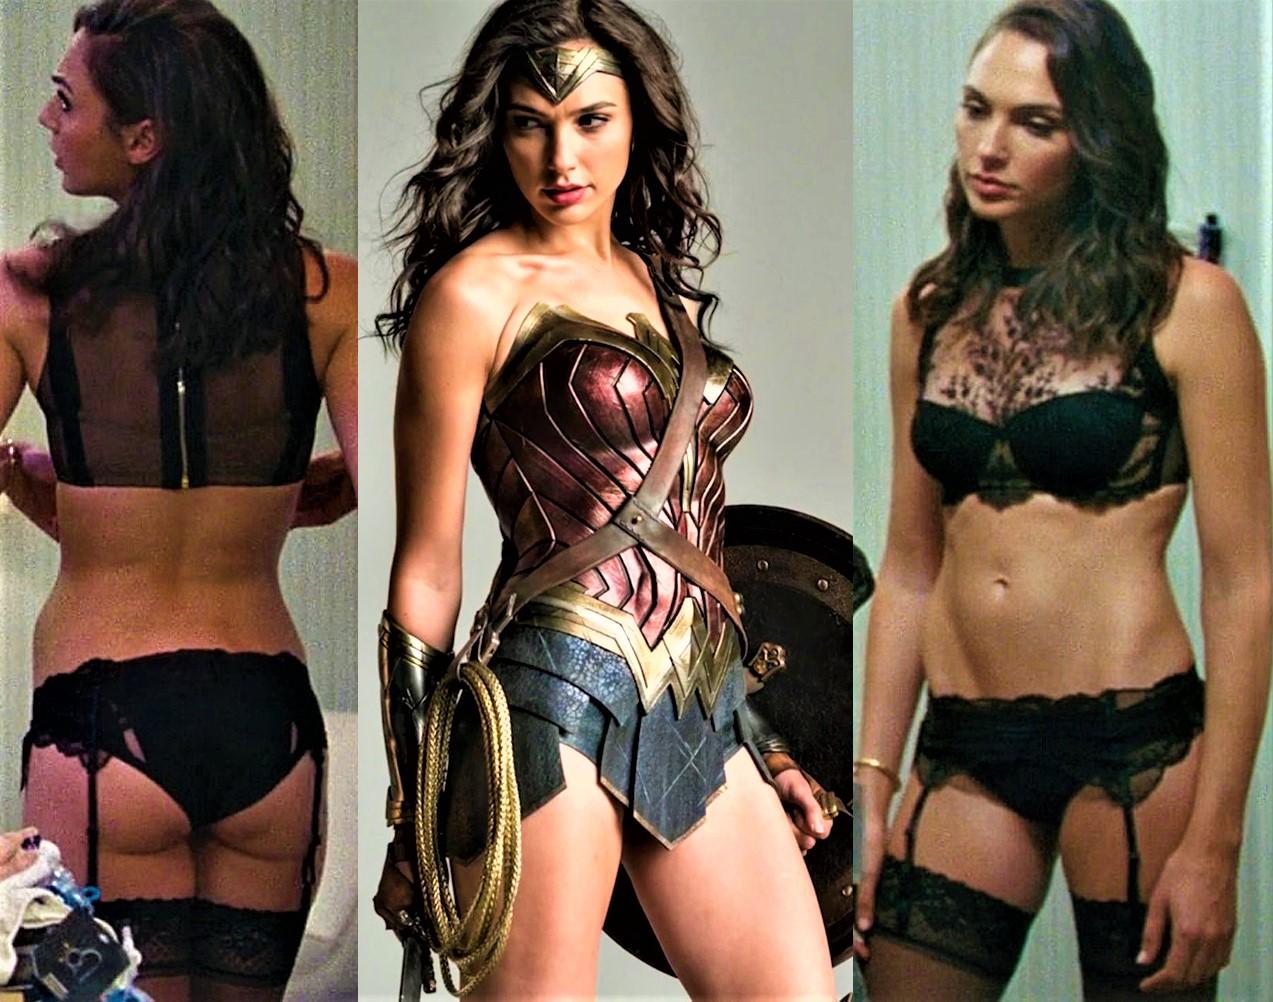 I'd let Gal Gadot do anything to me as she dommed me! Let me know any dirty, humiliating, or fucked up things she would do to me to see if I'm pathetic enough to want it ;)